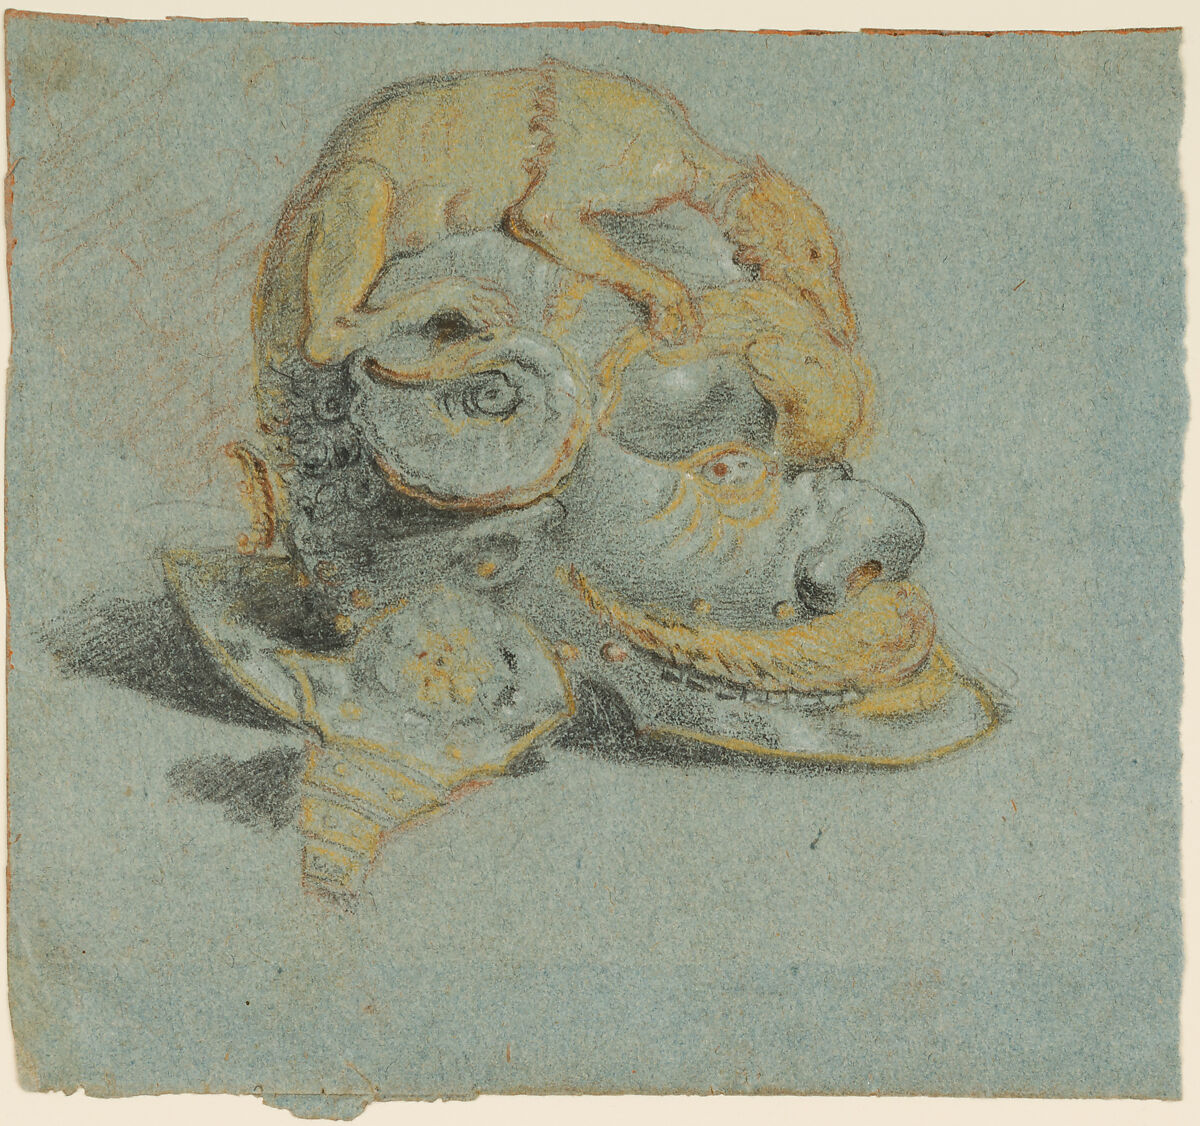 Drawing of a Parade Helmet, Colored chalk on paper, Italian, probably Venetian